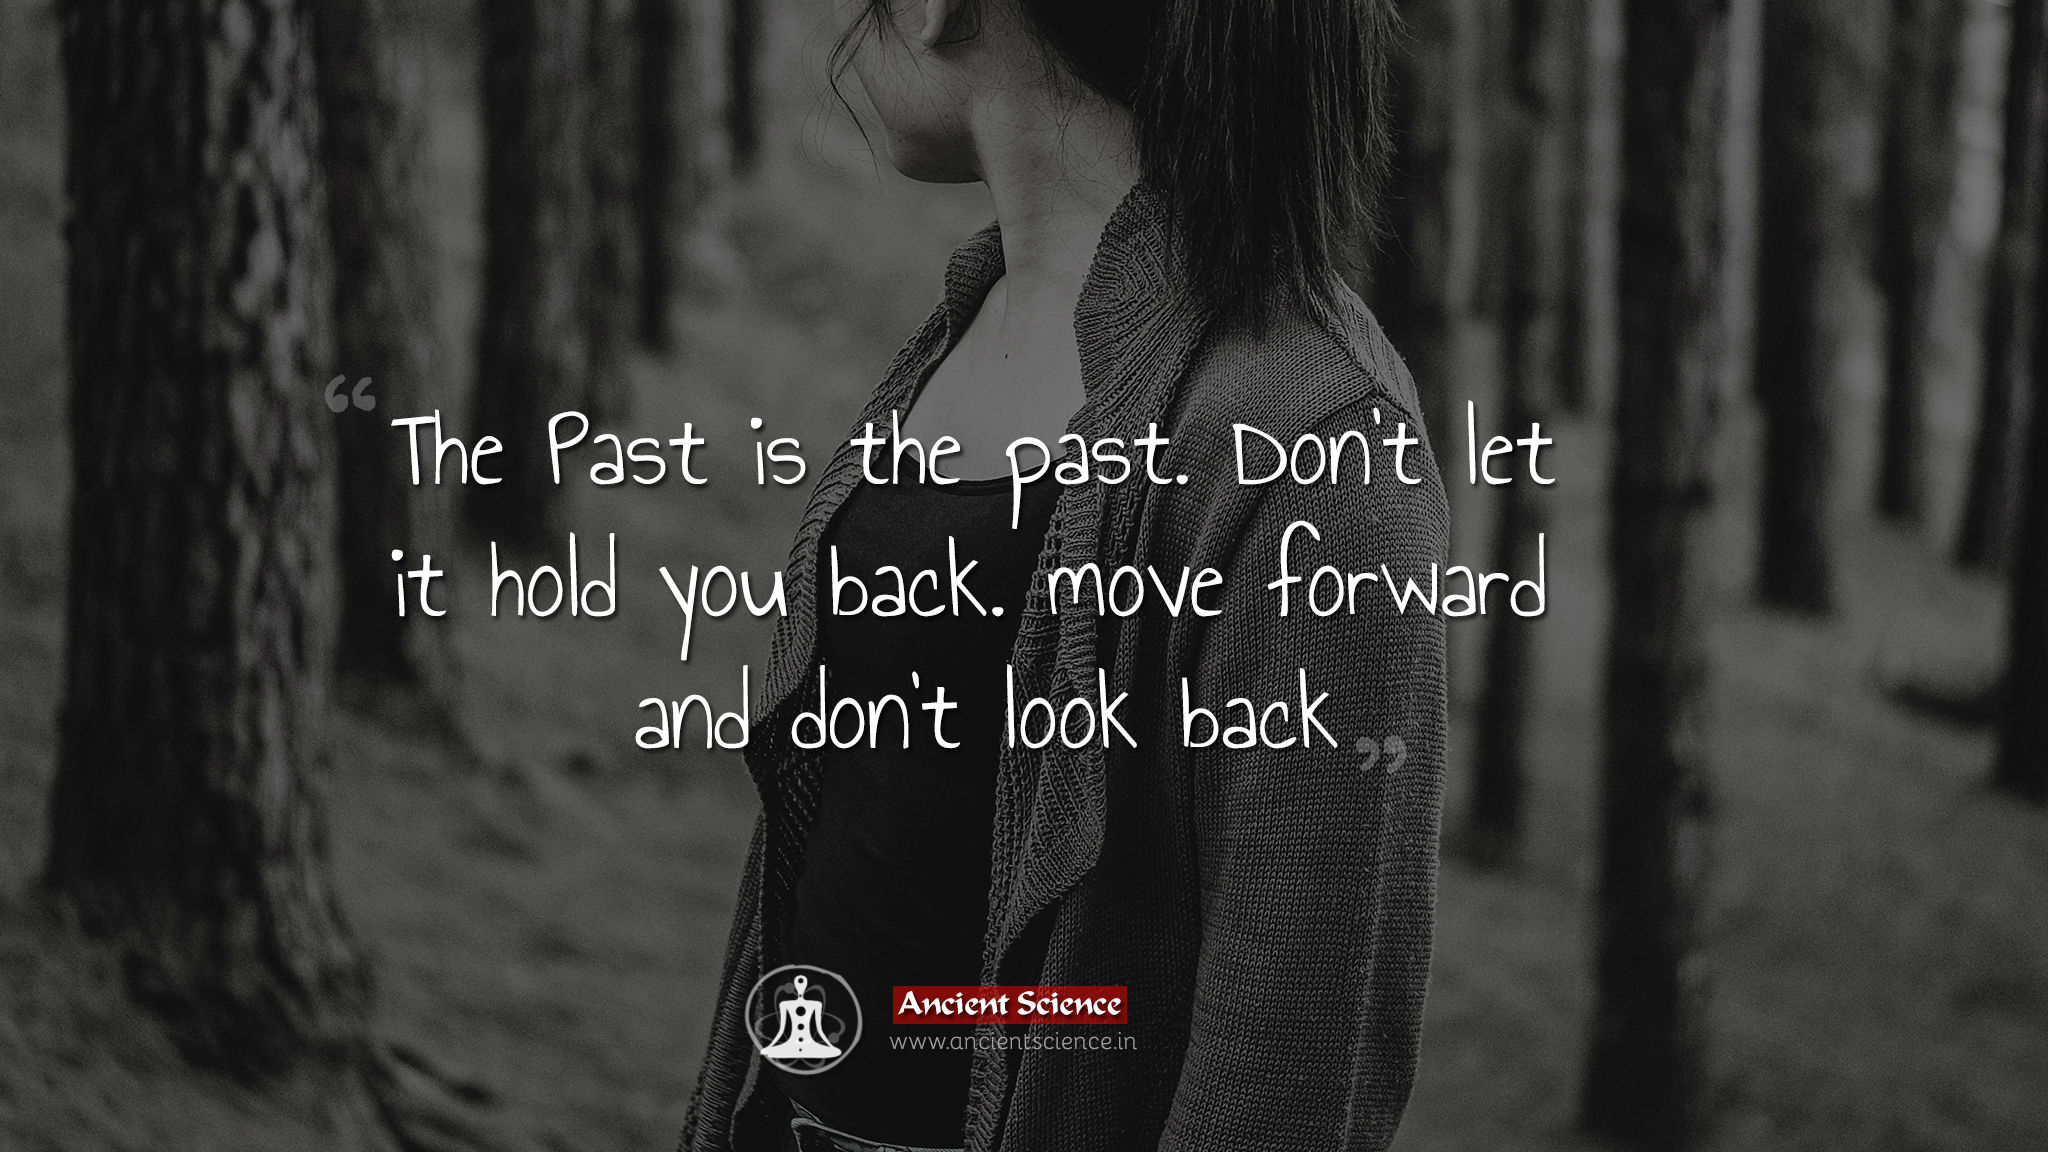 The Past is the past. Don't let it hold you back. move forward and don't look back